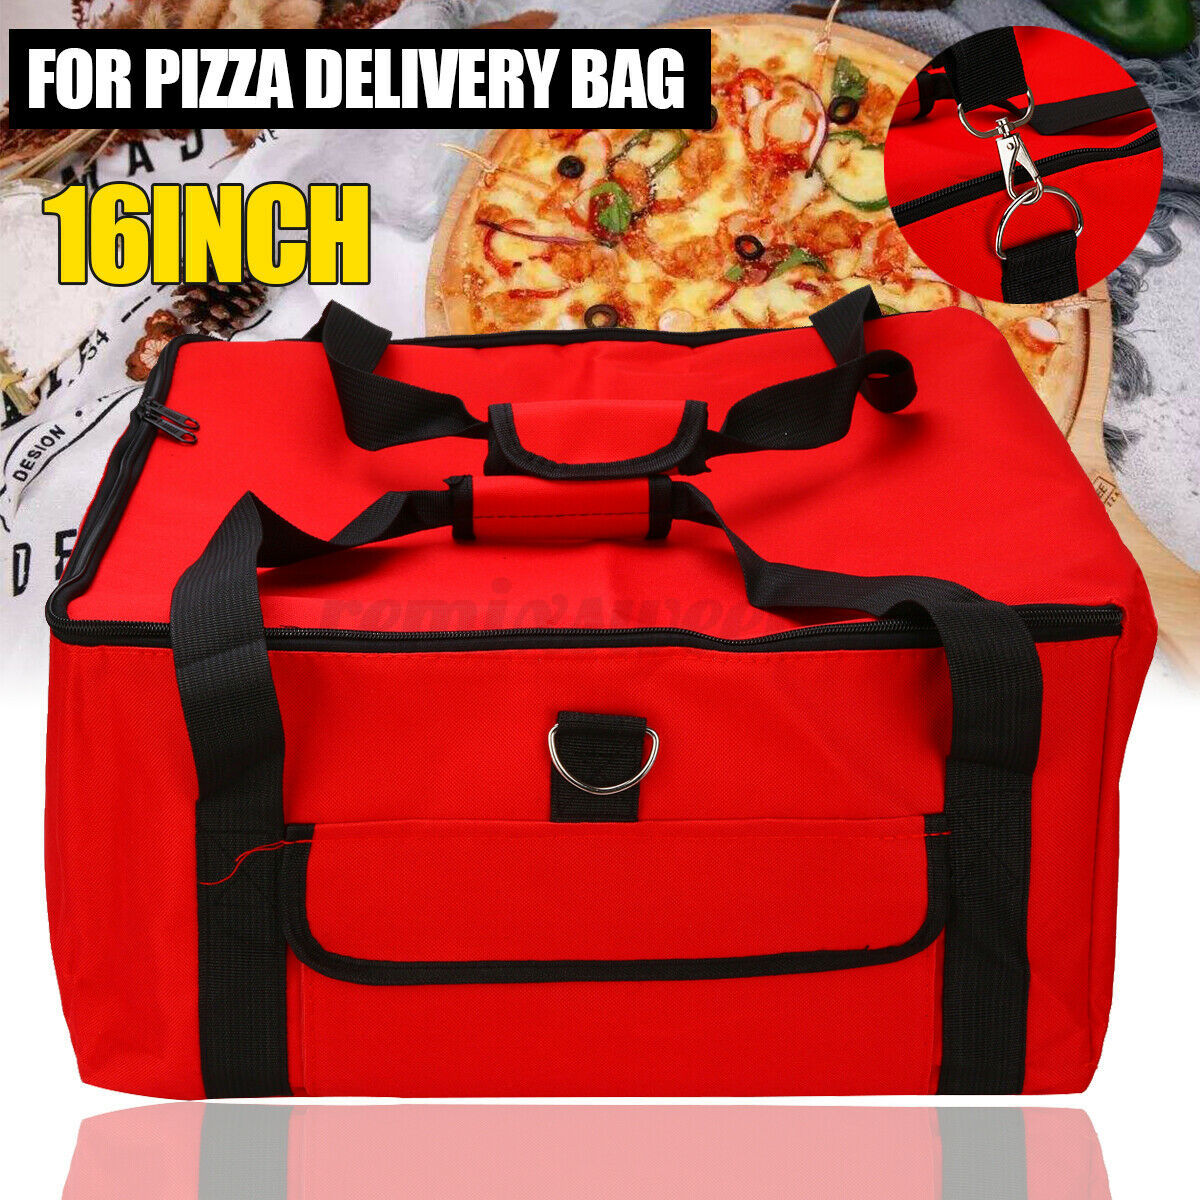 Pizza Delivery Bag Red Insulated Thermal Food Storage Holder Pizza Outdoor 16&#39;&#39; | eBay